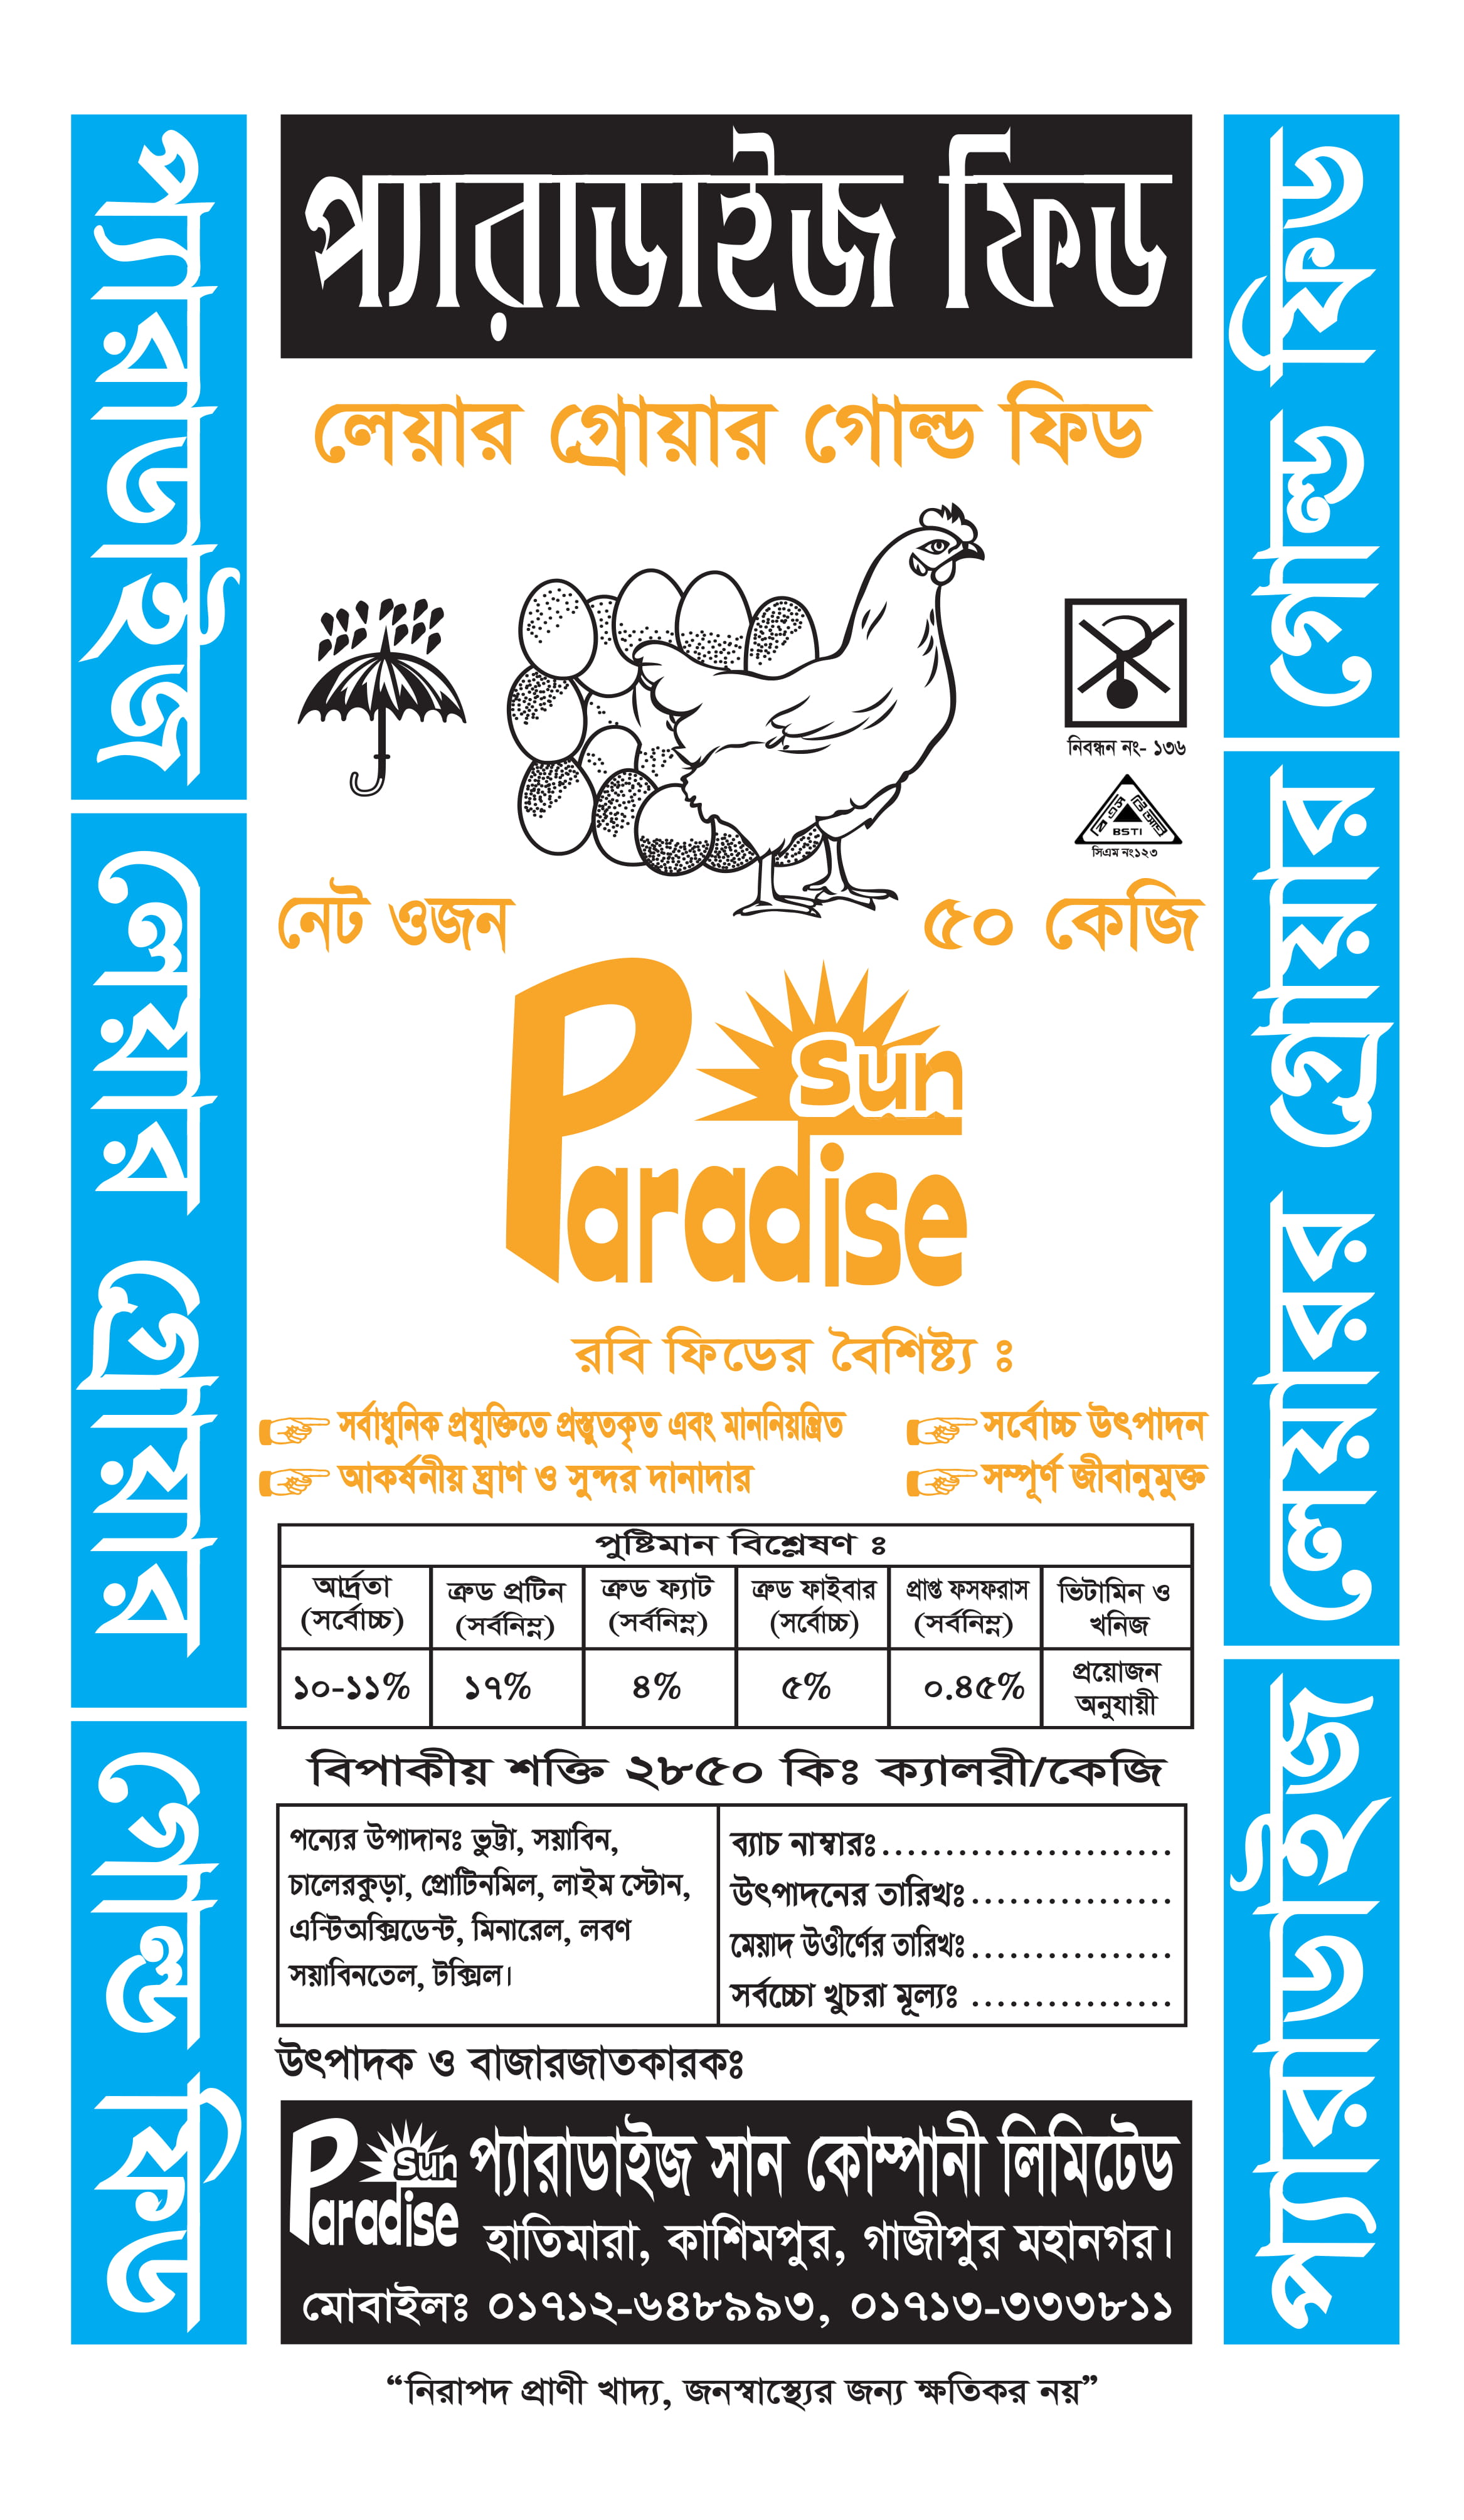 PARADISE LAYER GROWER GOLD